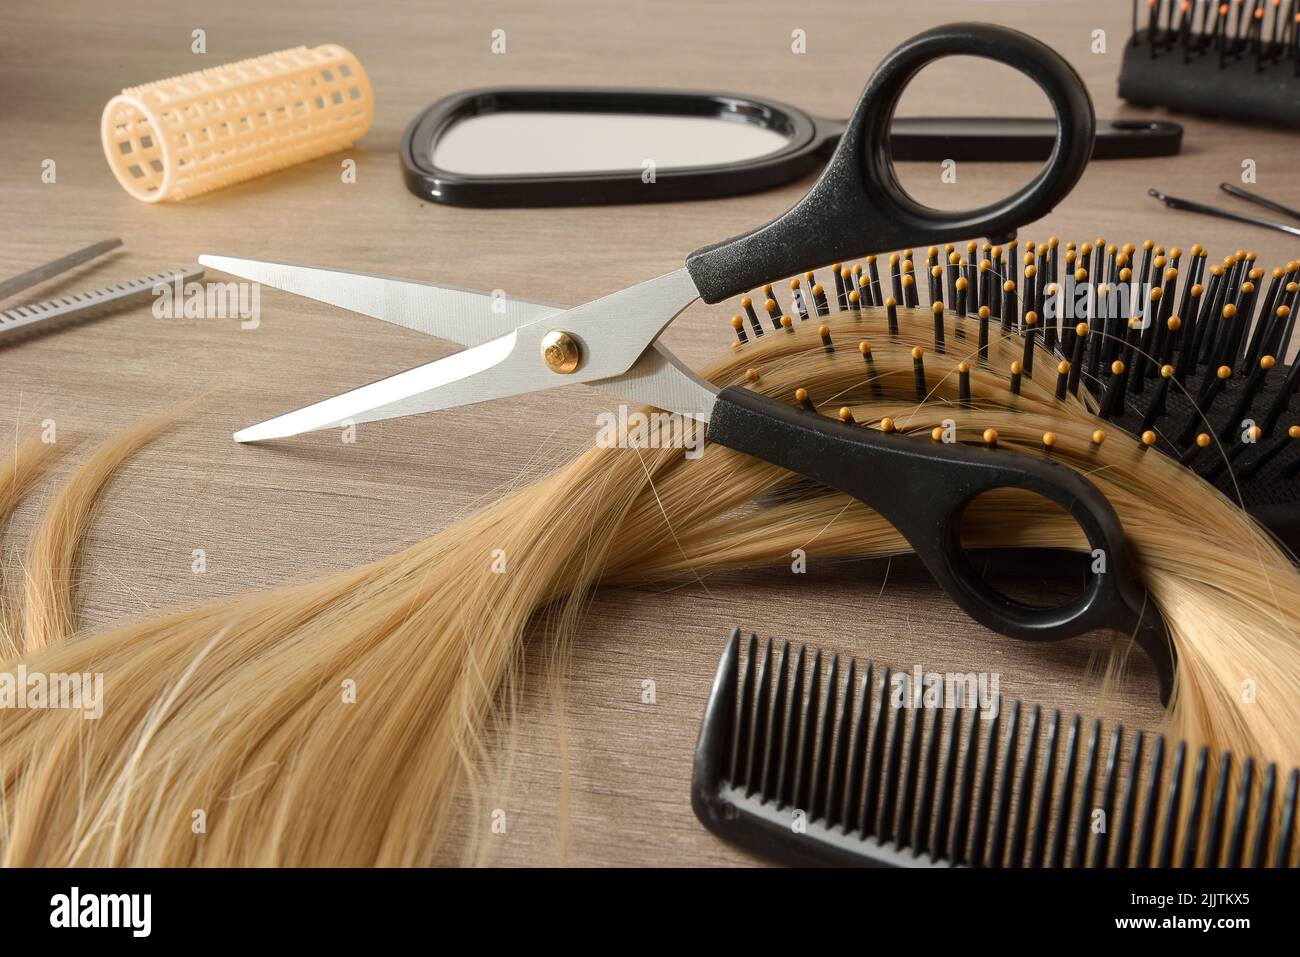 Hair cutting equipment with land detail with hairdressing tools around. Elevated view. Horizontal composition. Stock Photo